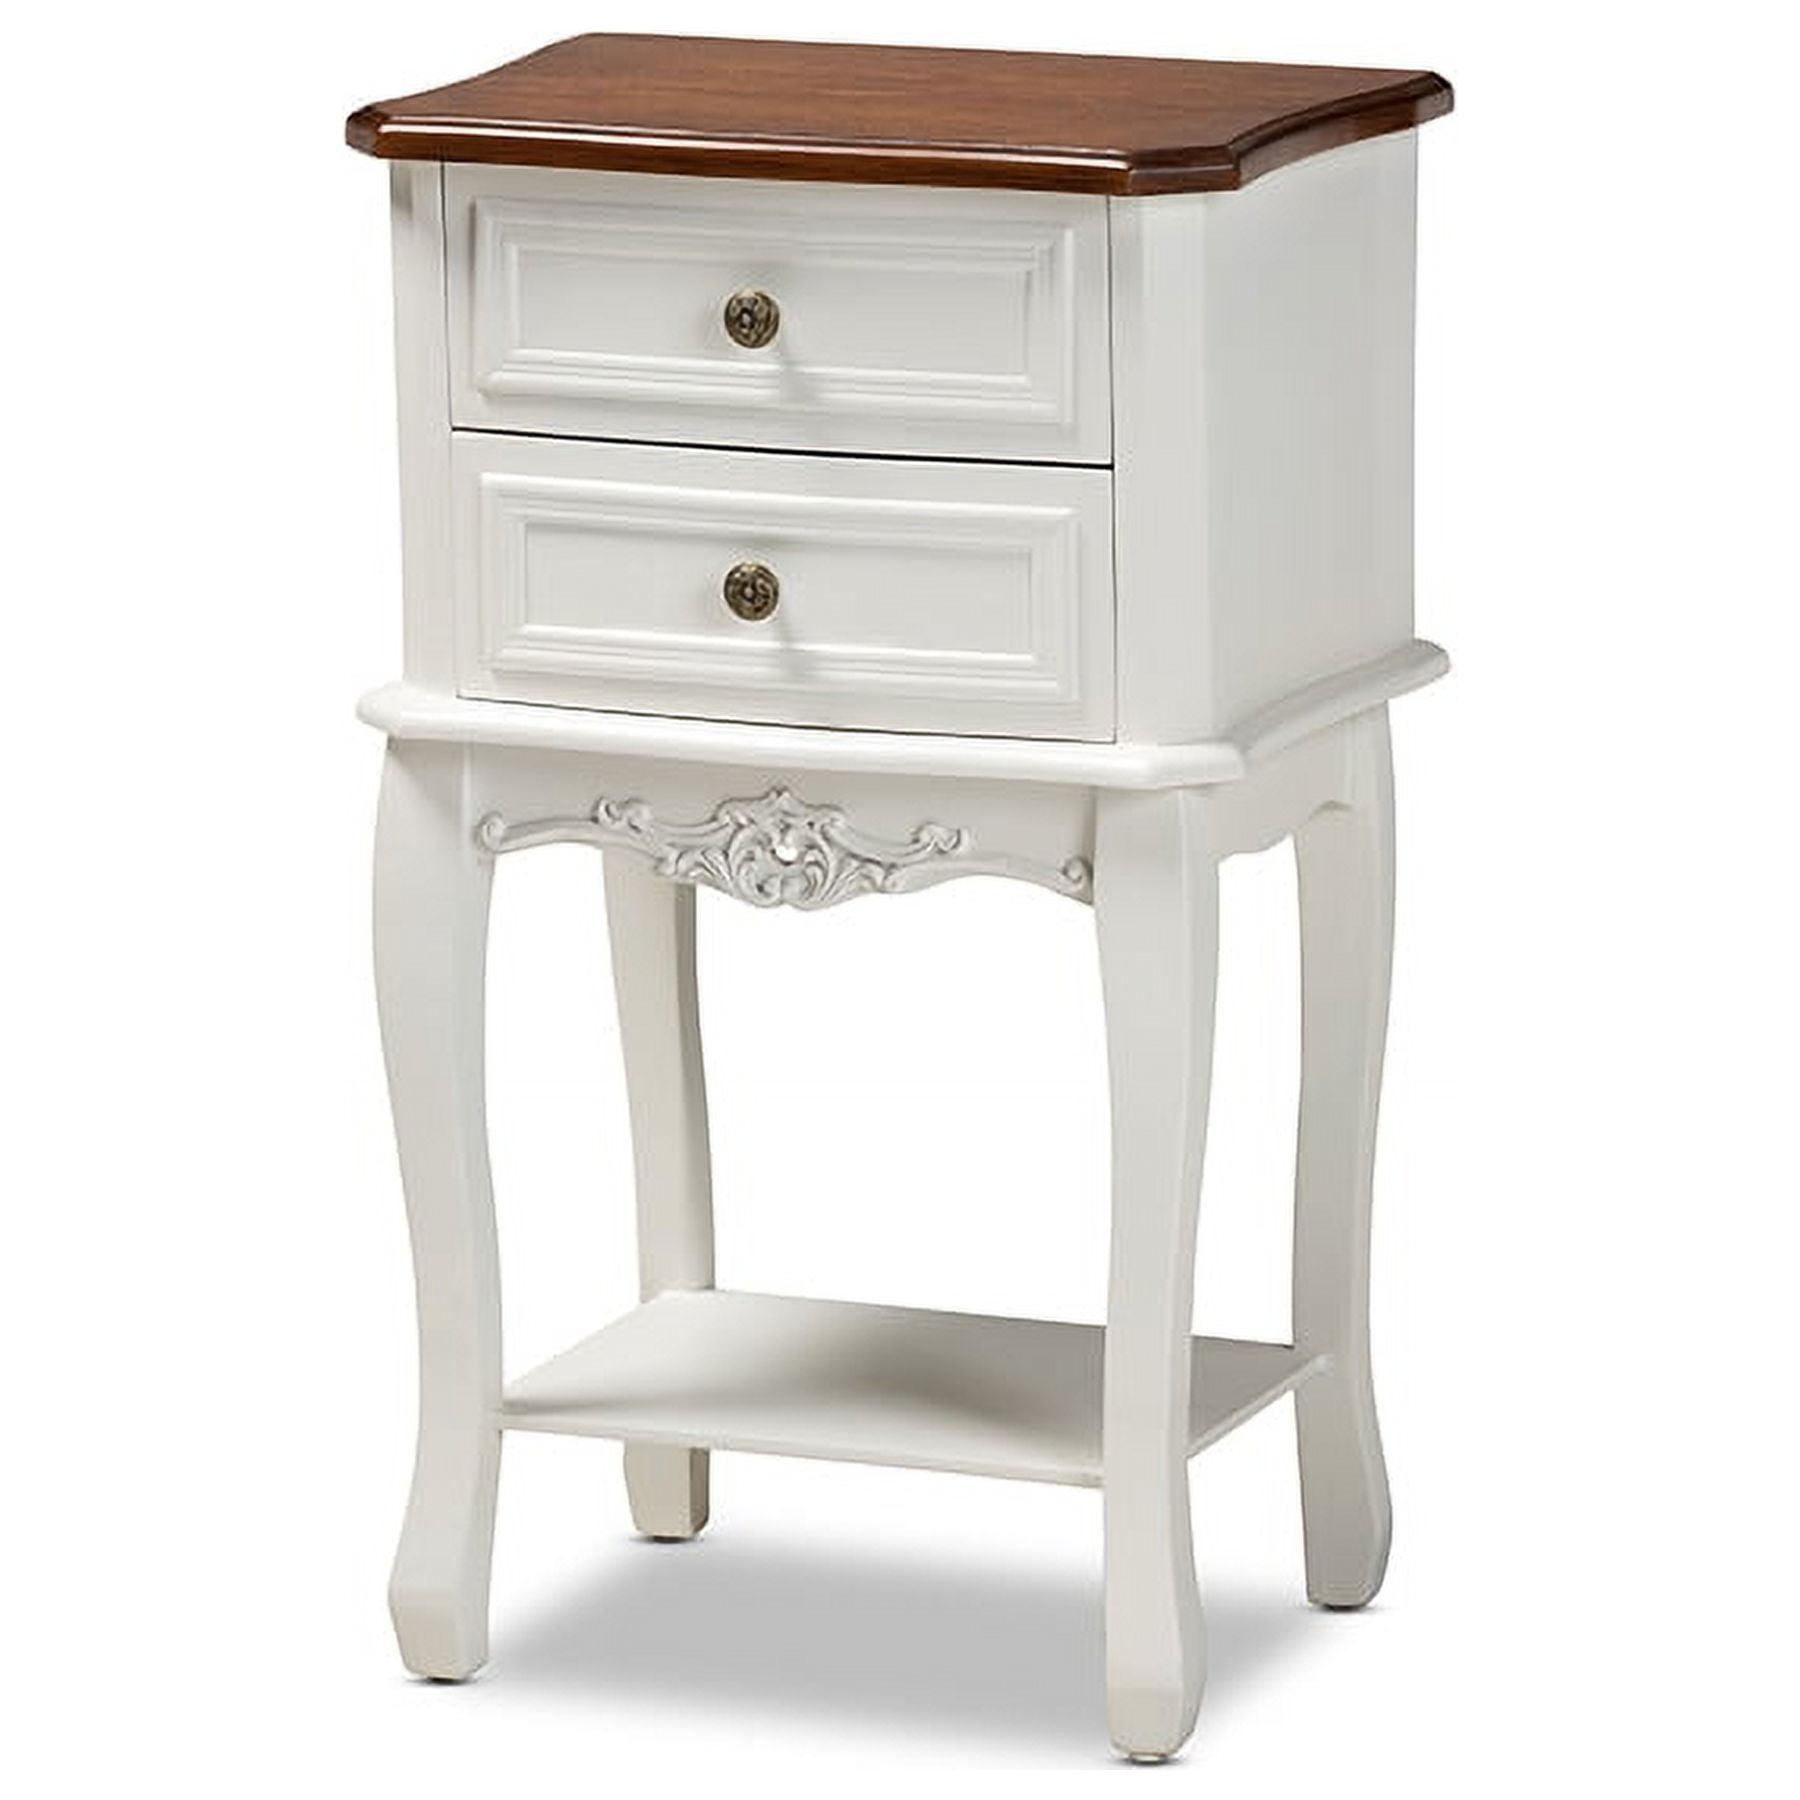 Darla Traditional French White & Cherry Brown Wood Nightstand